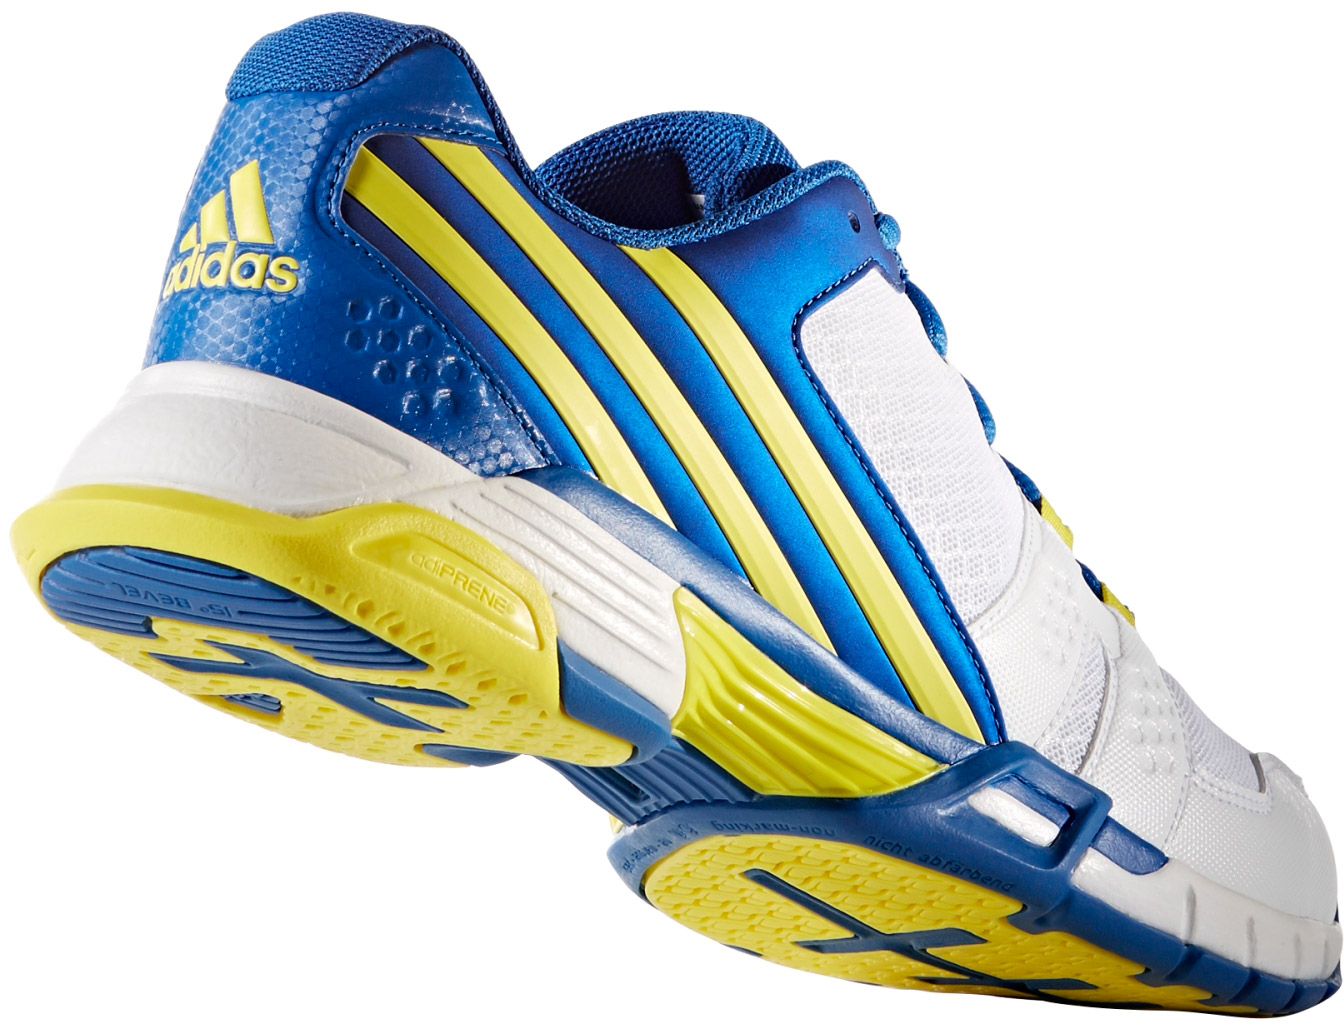 Men’s volleyball shoes